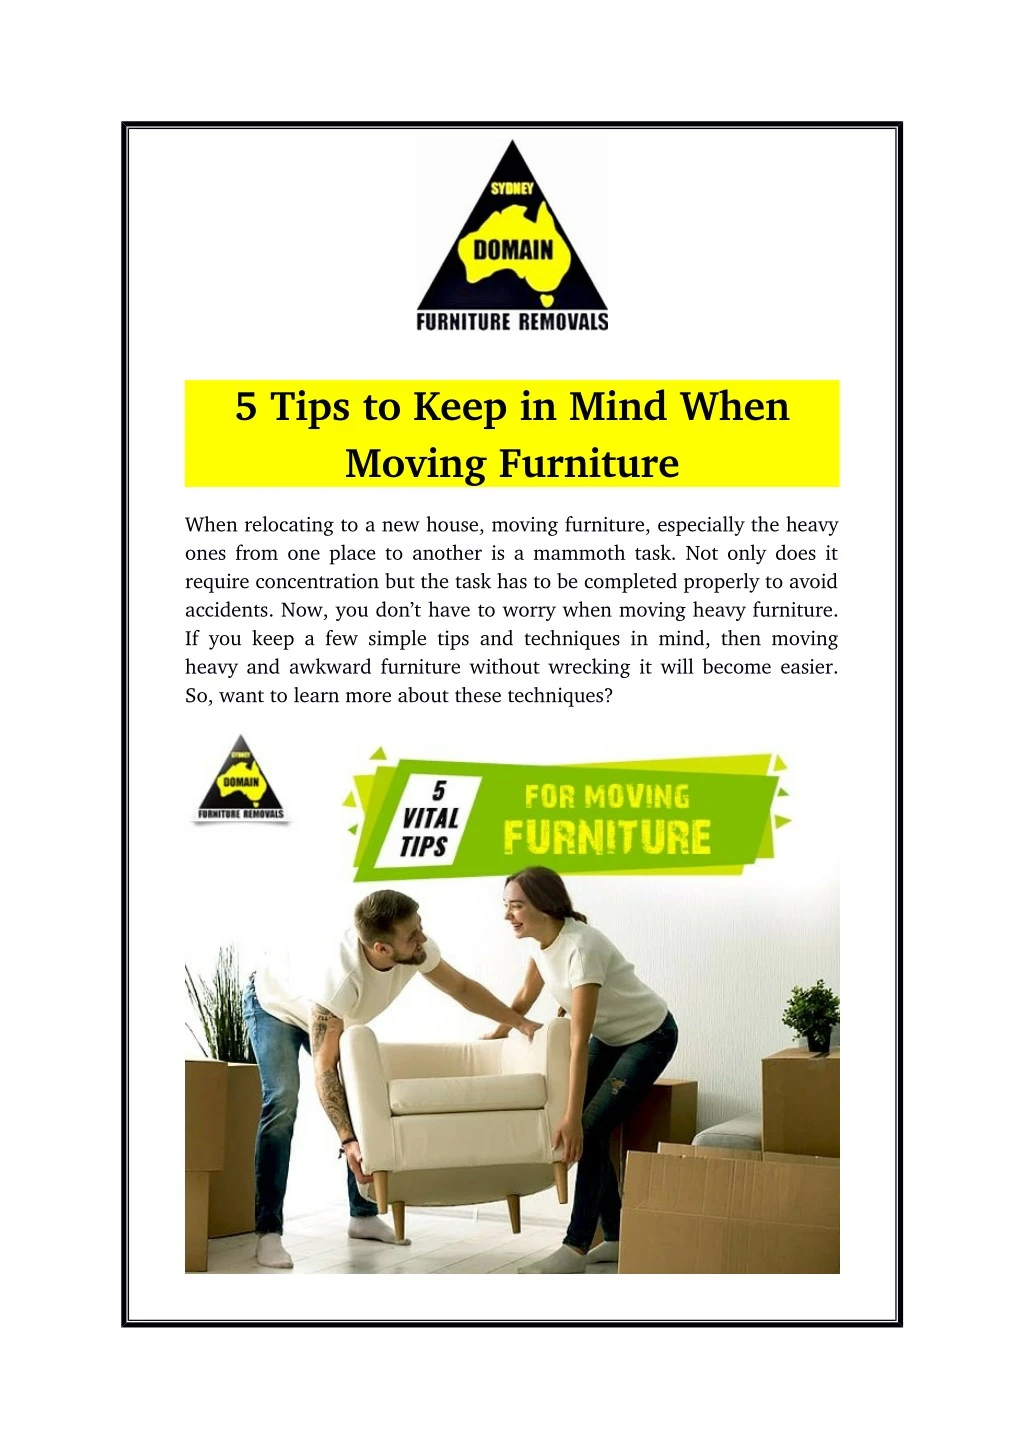 5 tips to keep in mind when moving furniture